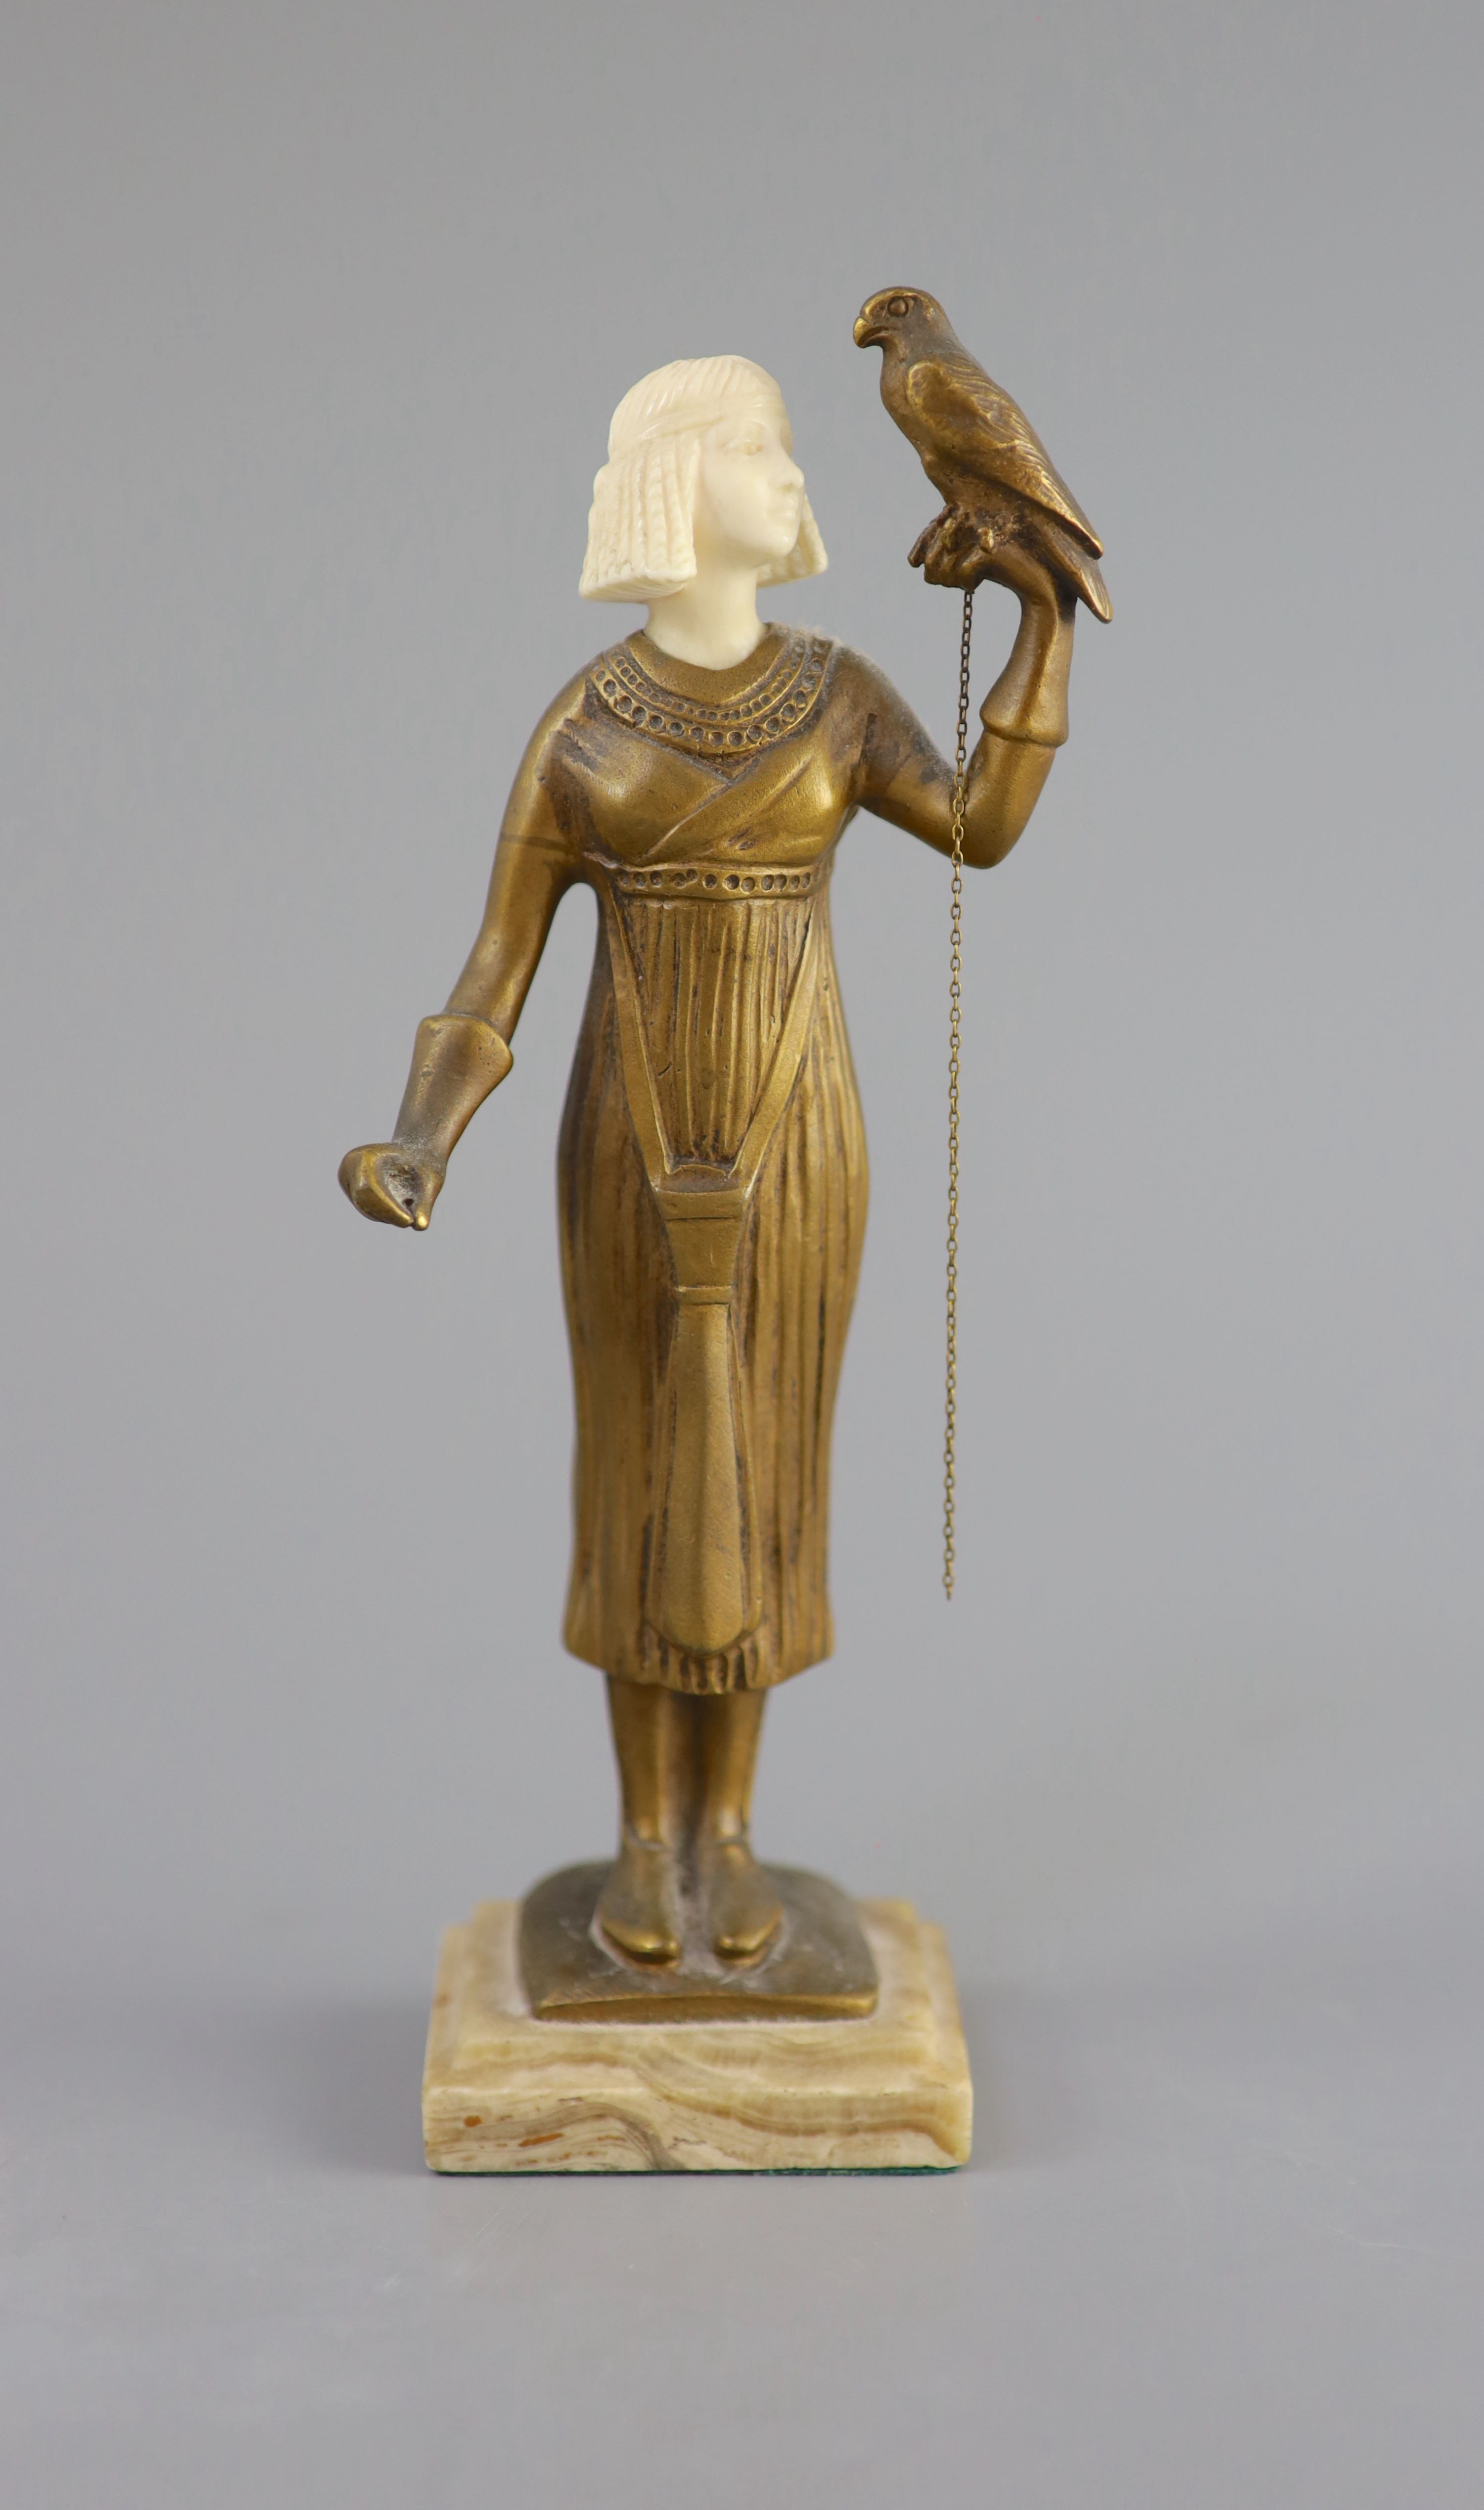 Hélène Maynard White (American, b.1870). A bronze and ivory figure of an Egyptianesque girl, holding a falcon, c1920, 20cm high